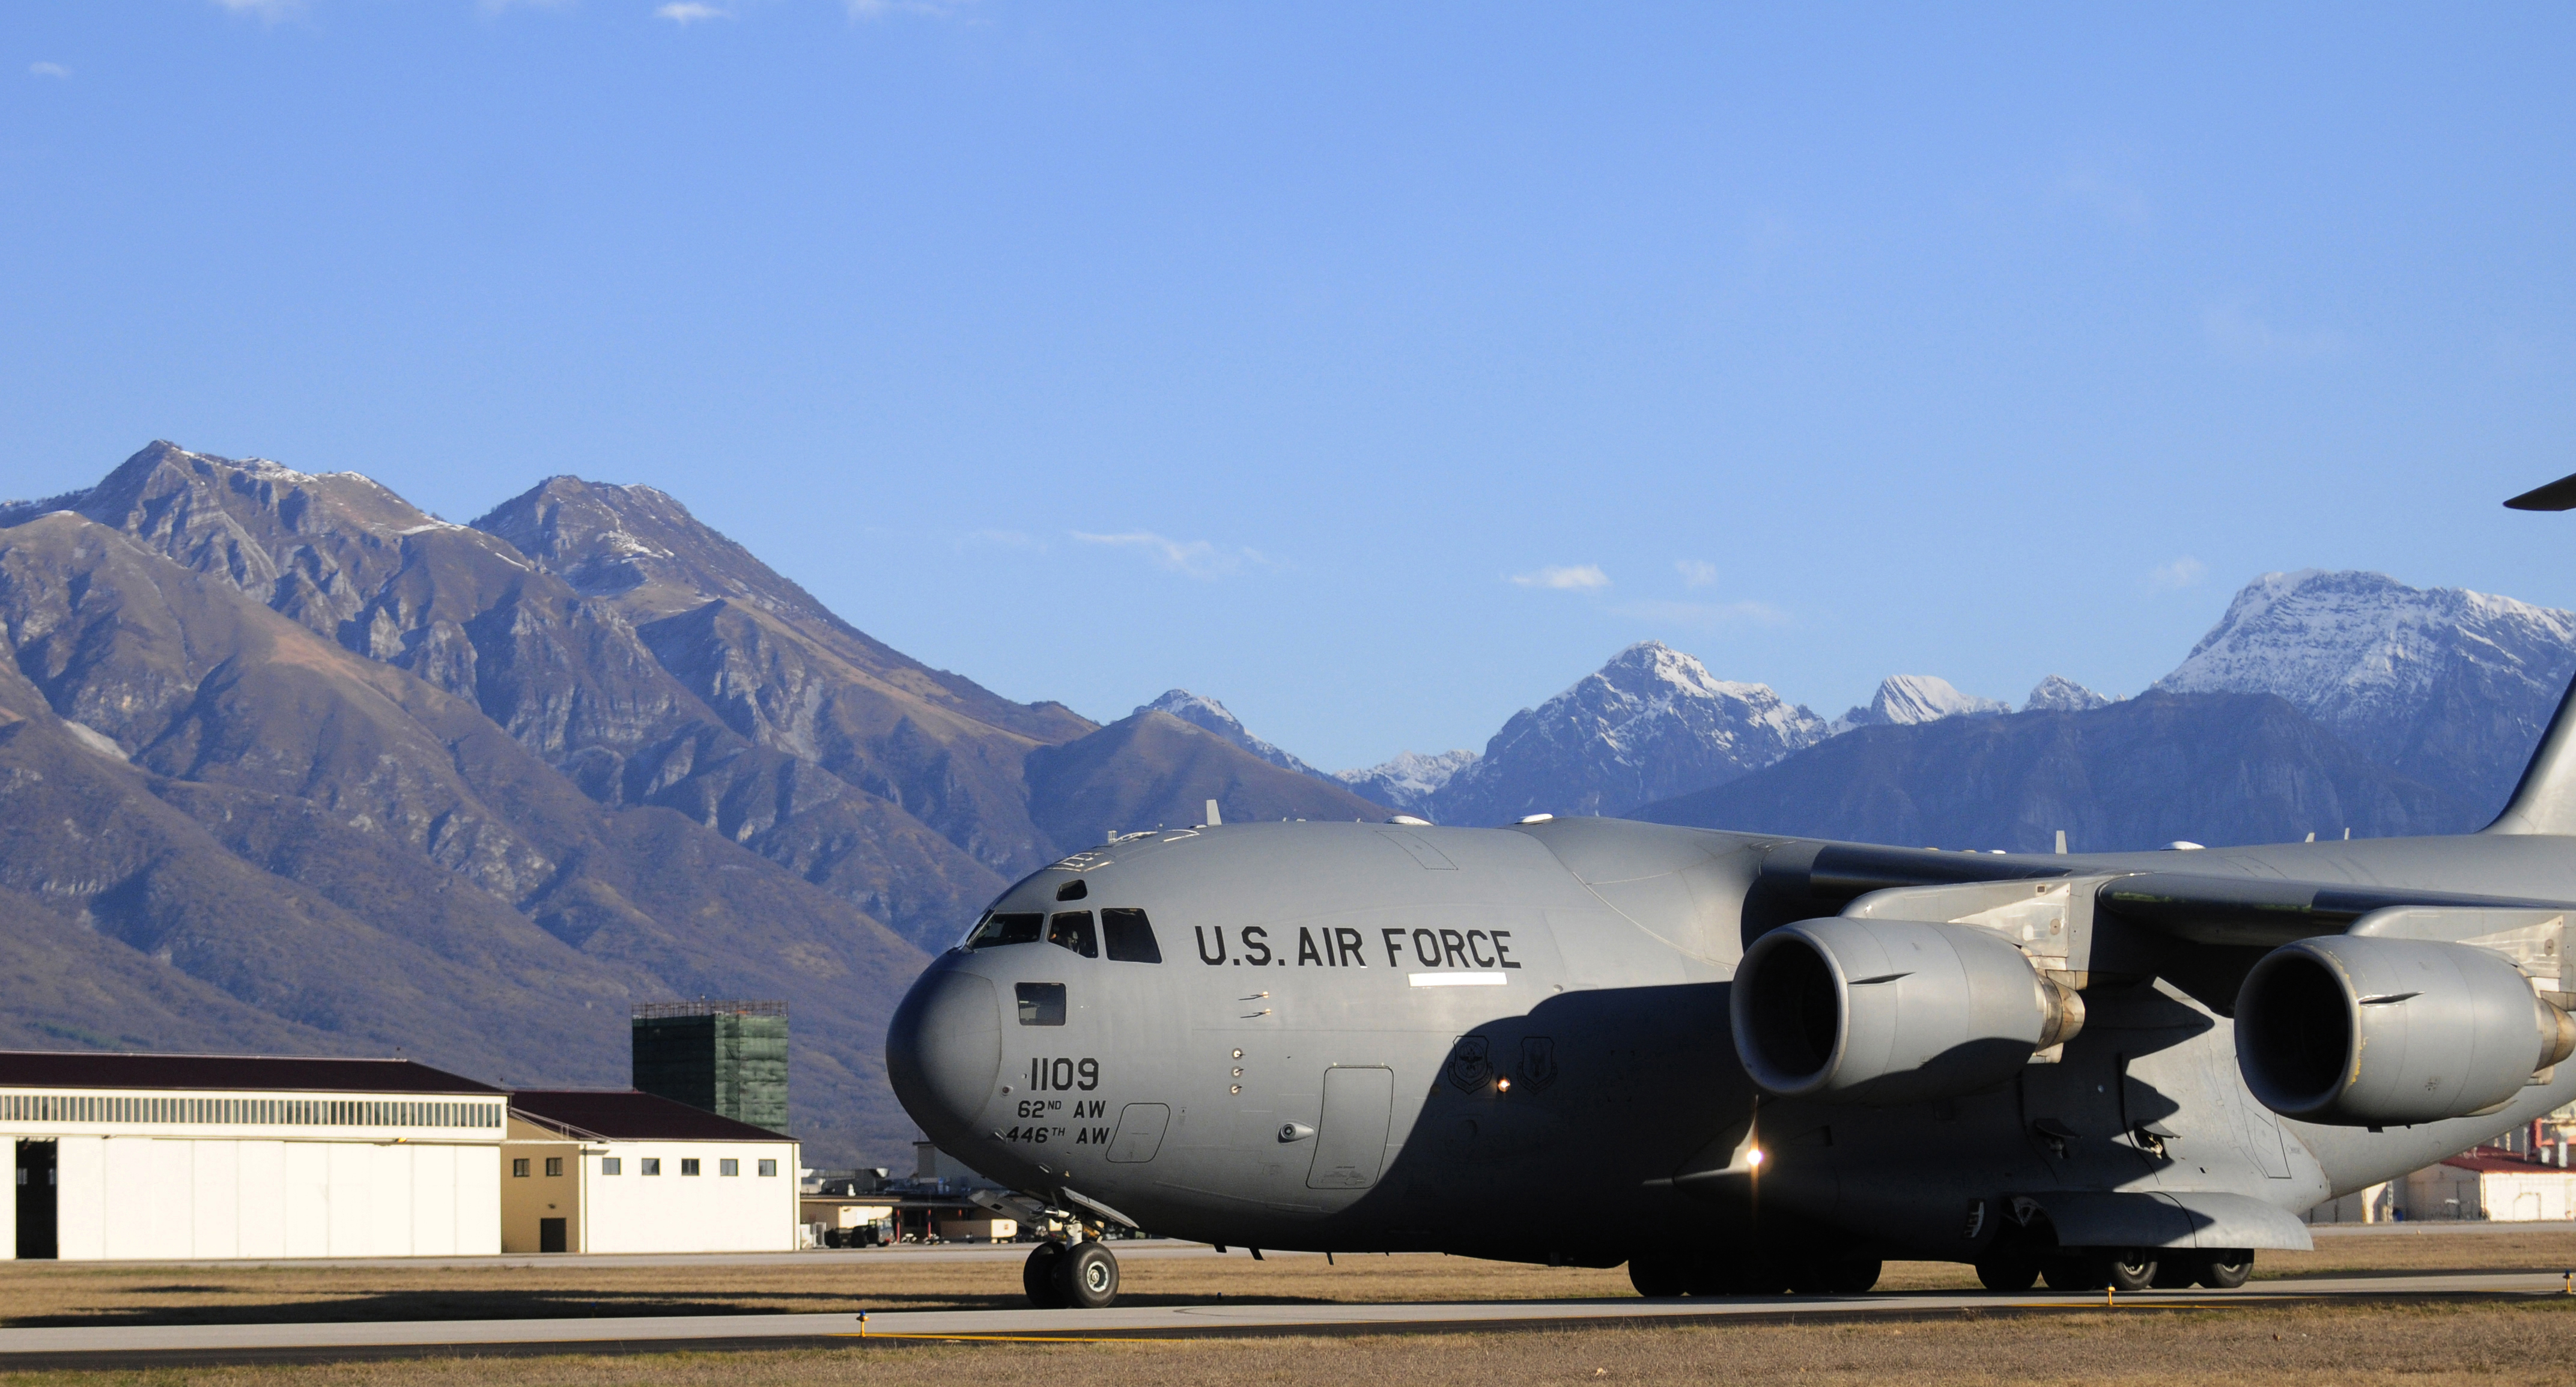 Aviano Air Base Home Page